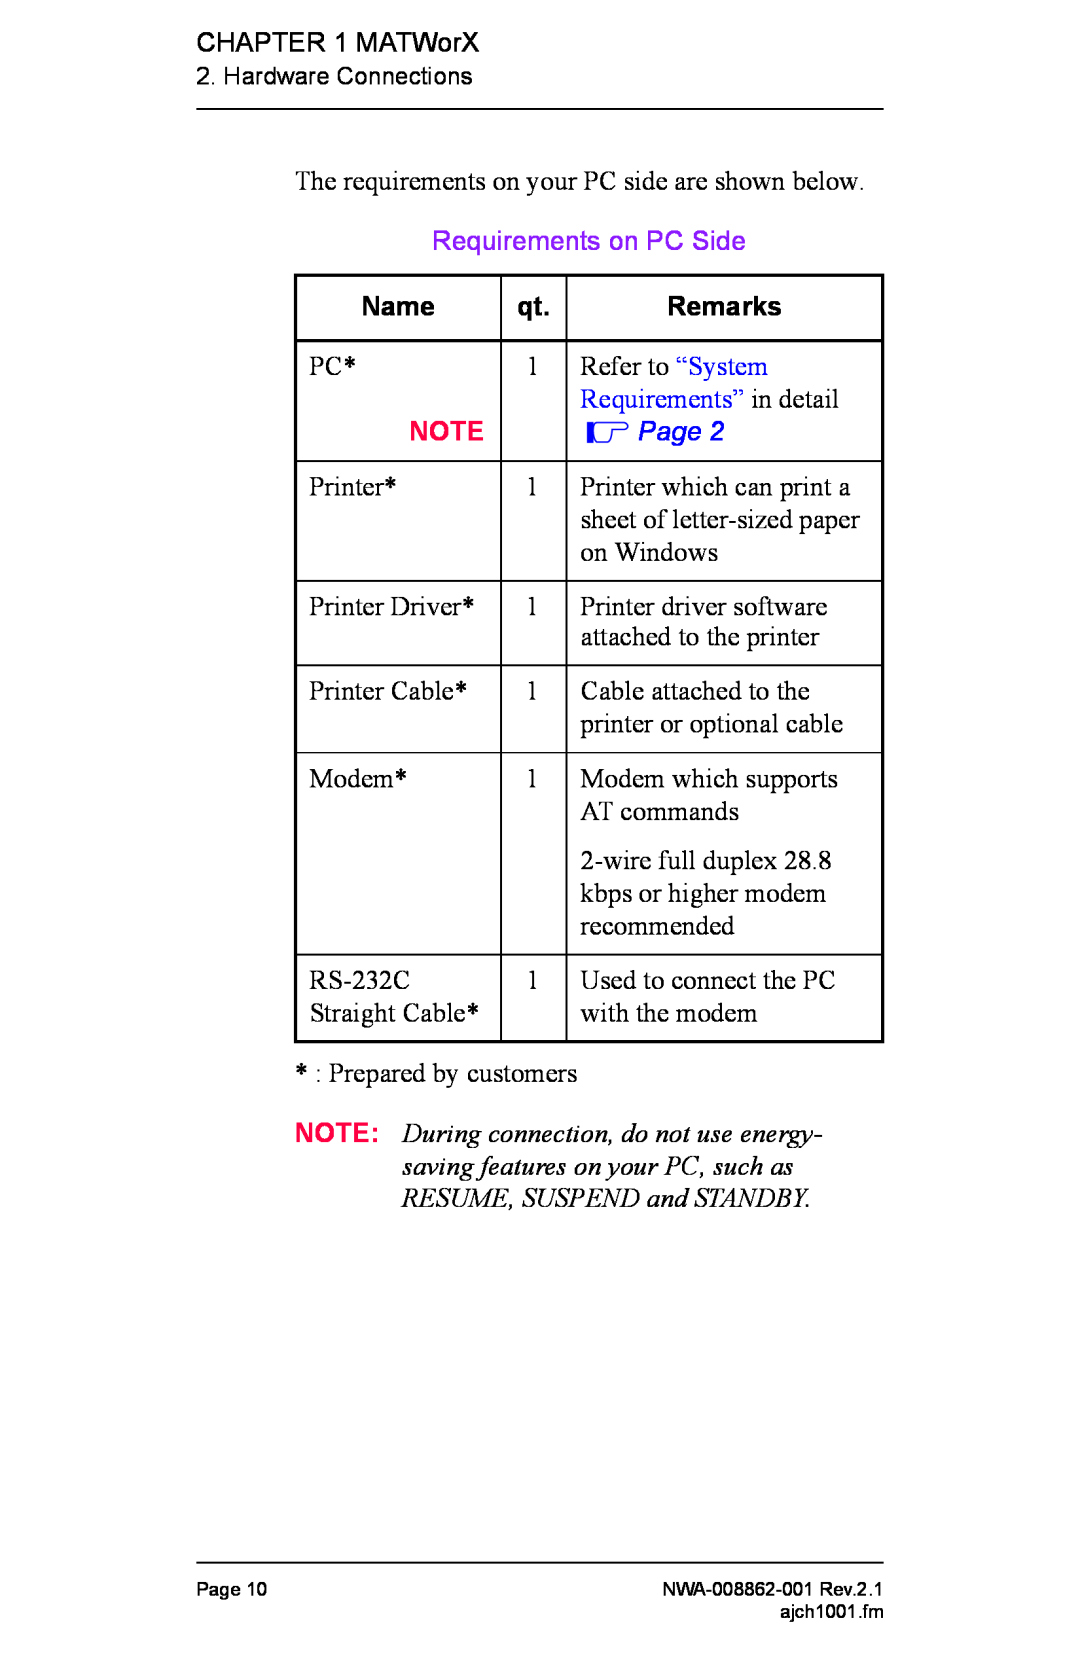 NEC NWA-008862-001 manual Requirements on PC Side, Name, Remarks, Requirements” in detail, Page 